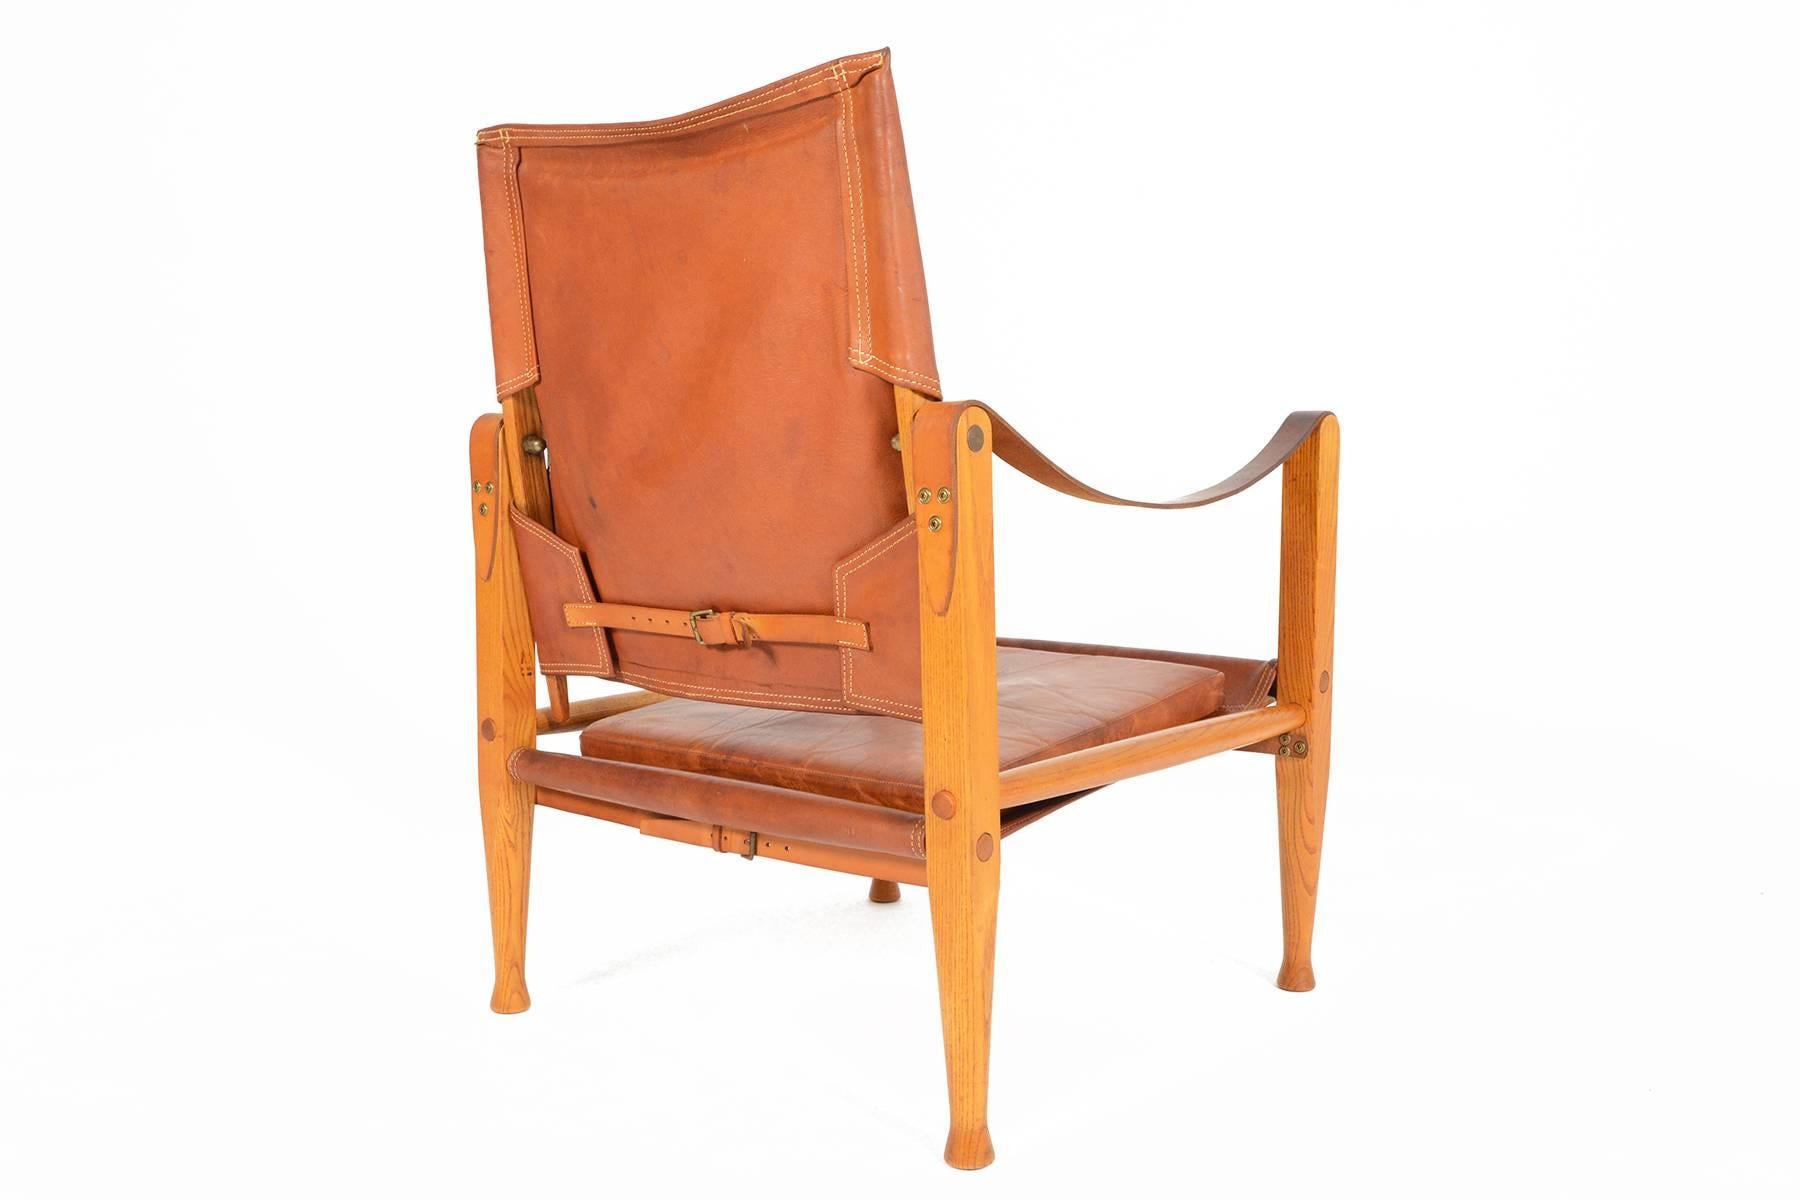 This gorgeous Danish modern safari chair was designed by Kaare Klint in the 1933. The exposed oak frame uses the support of doweled rods, slung leather and brass buckled straps. The backrest swivels for added comfort. The beautiful original burnt